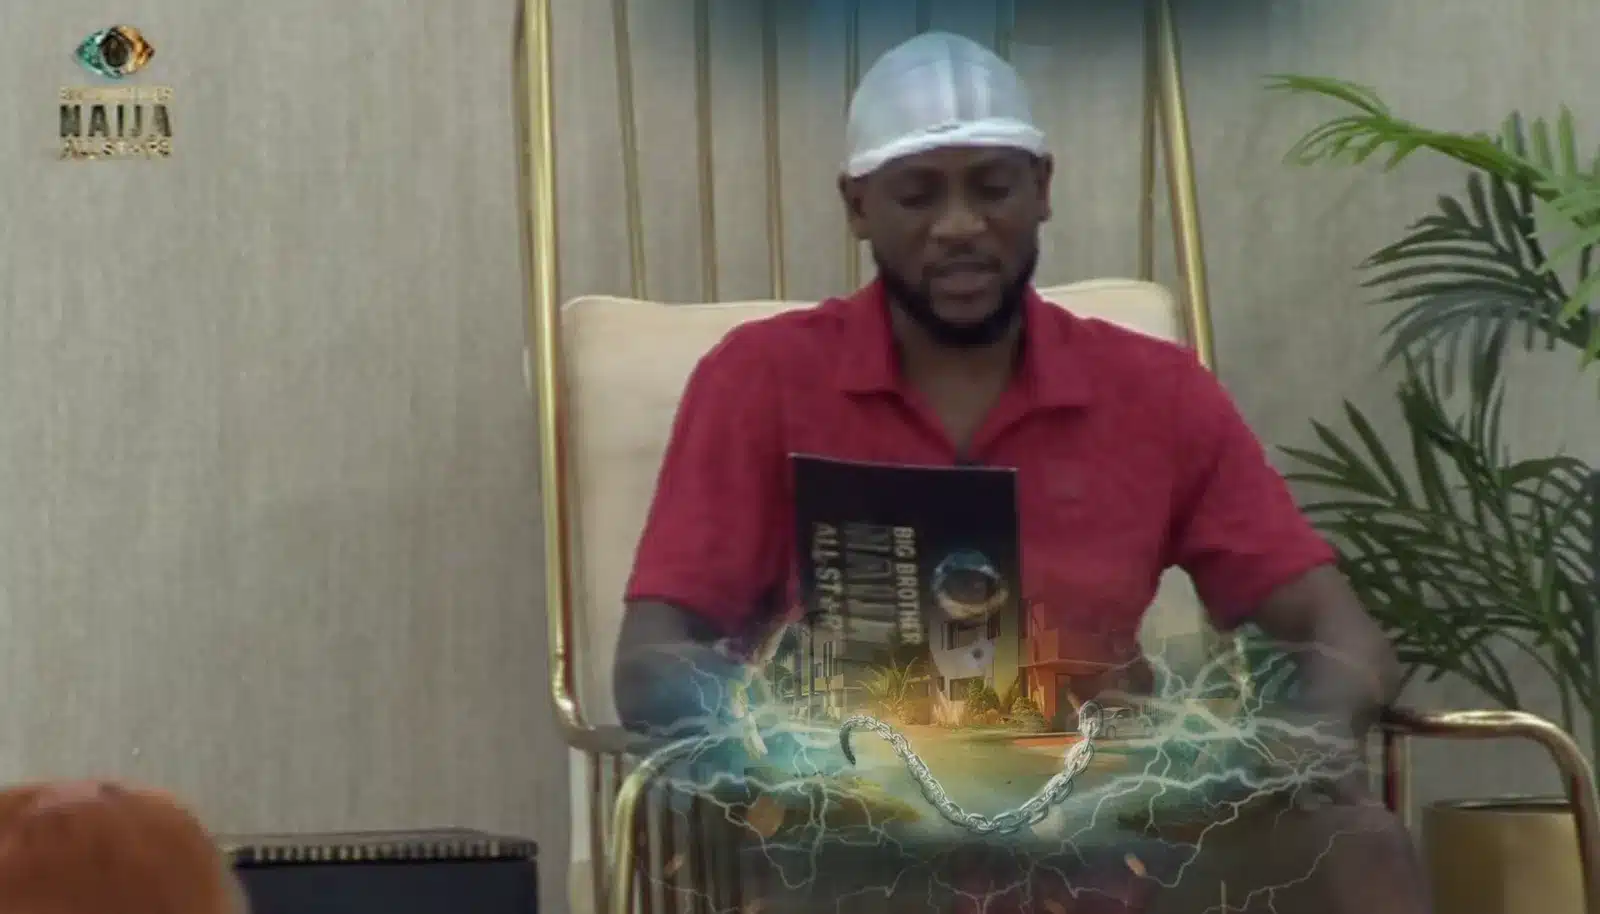 BBNaija Day 50: Angel's conspiracies with the boys, Cross reminisces about KimOprah, Somgel in strategy session